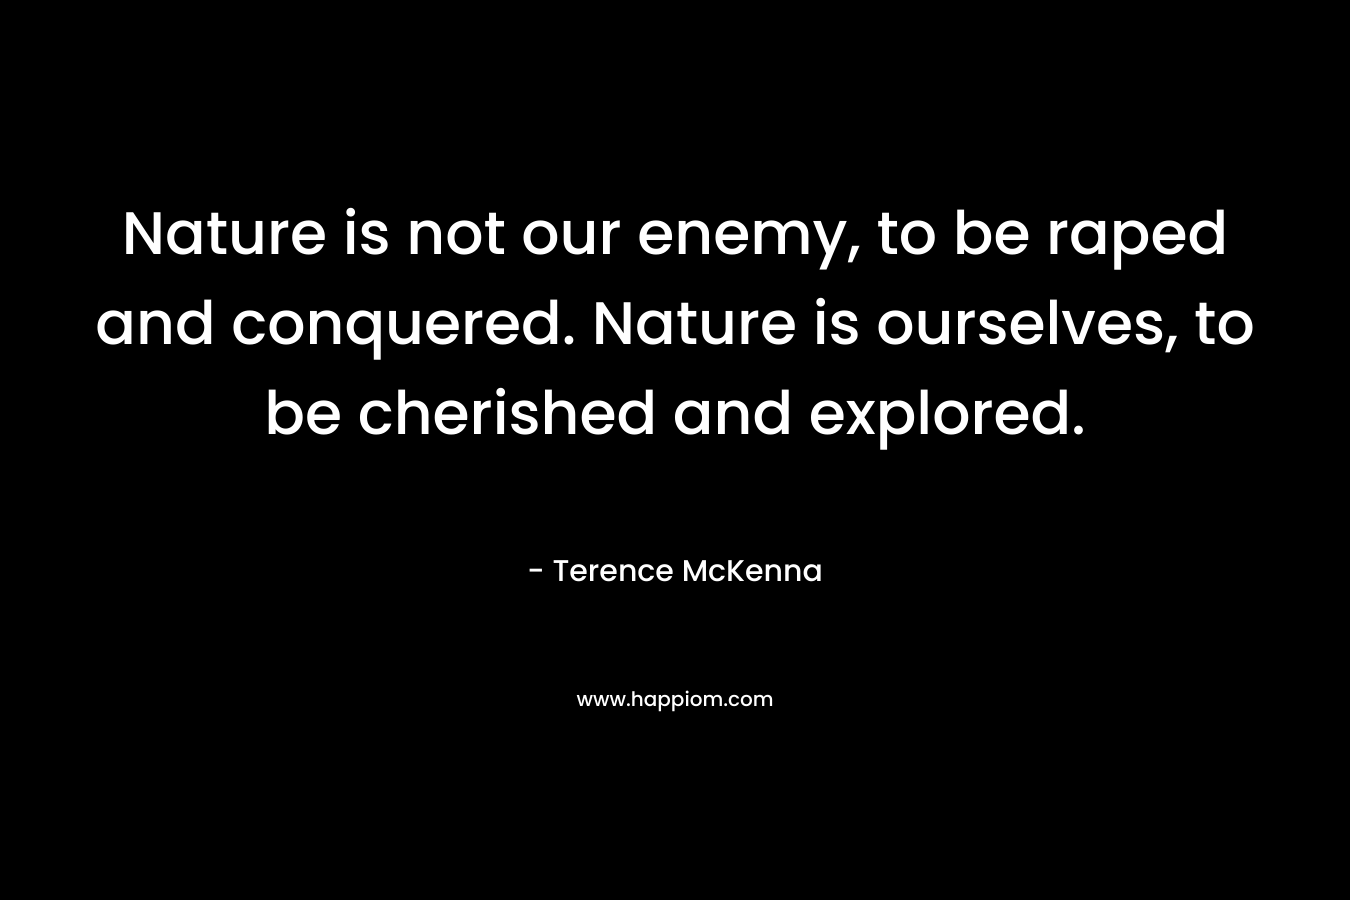 Nature is not our enemy, to be raped and conquered. Nature is ourselves, to be cherished and explored.